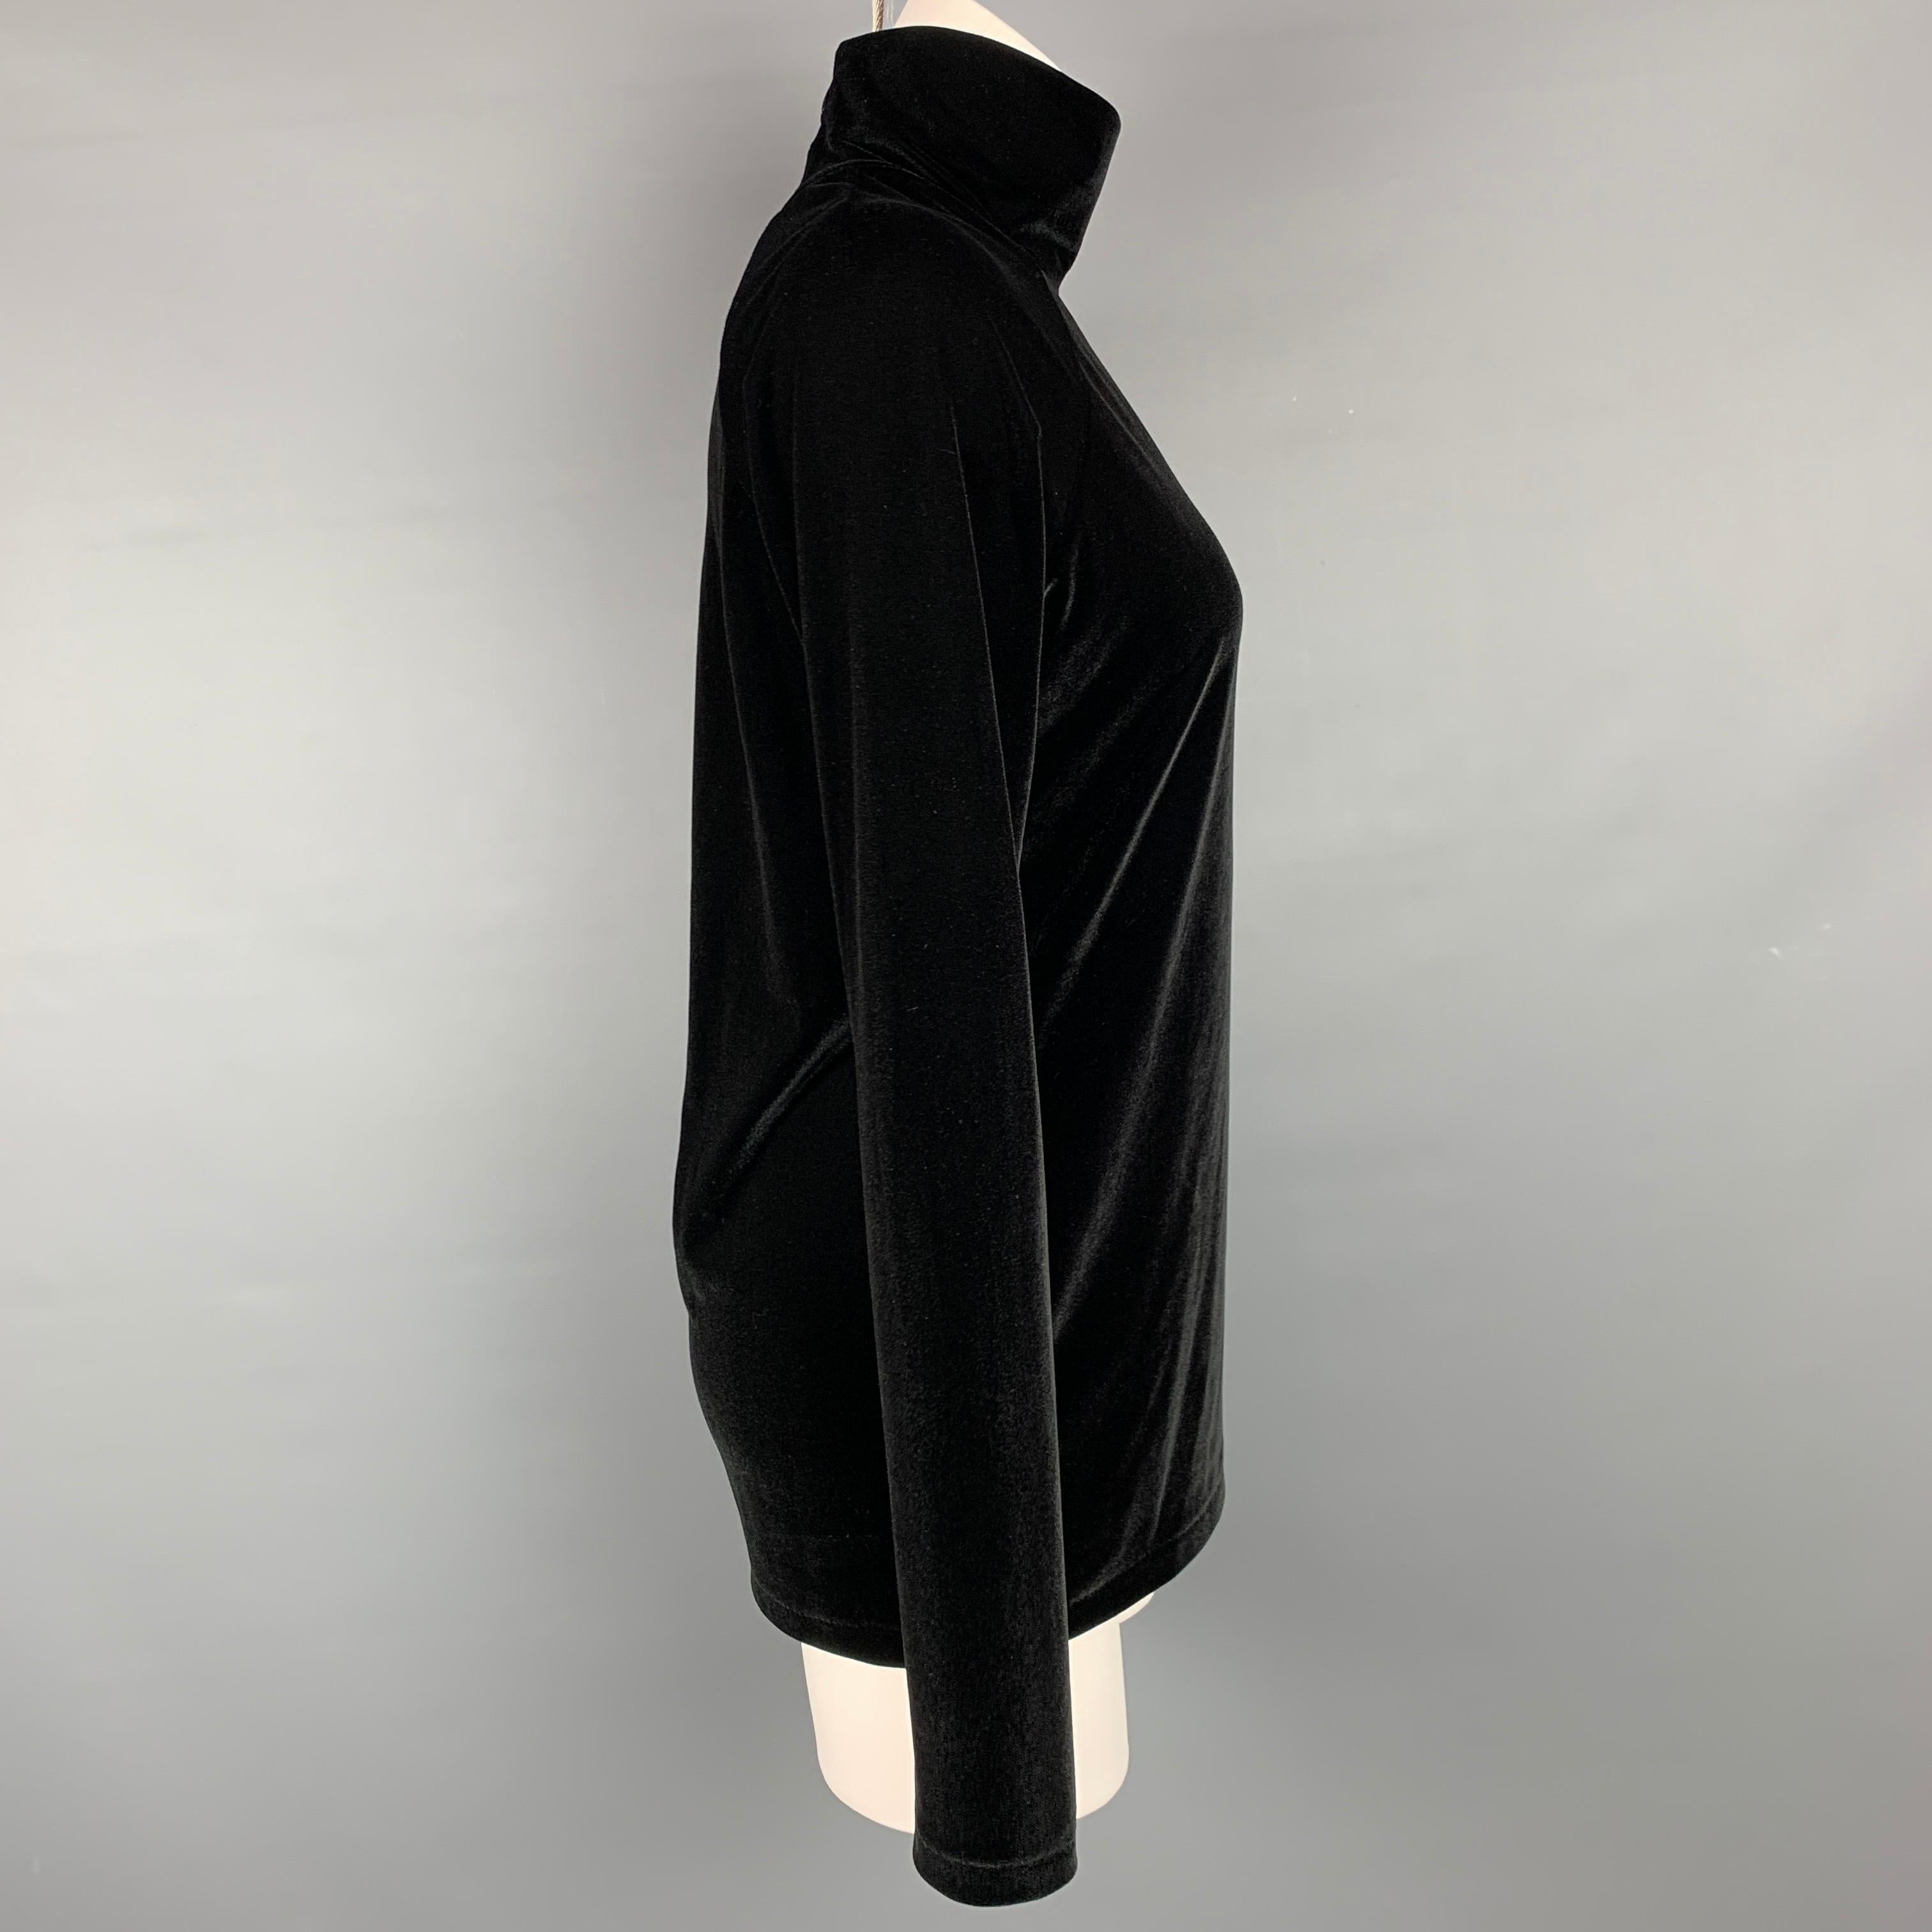 HAIDER ACKERMANN pullover comes in a black polyester featuring a turtleneck and a back zipper closure. Made in Portugal.

Very Good Pre-Owned Condition.
Marked: L

Measurements:

Shoulder: 17 in.
Bust: 38 in.
Sleeve: 26 in.
Length: 26.5 in. 